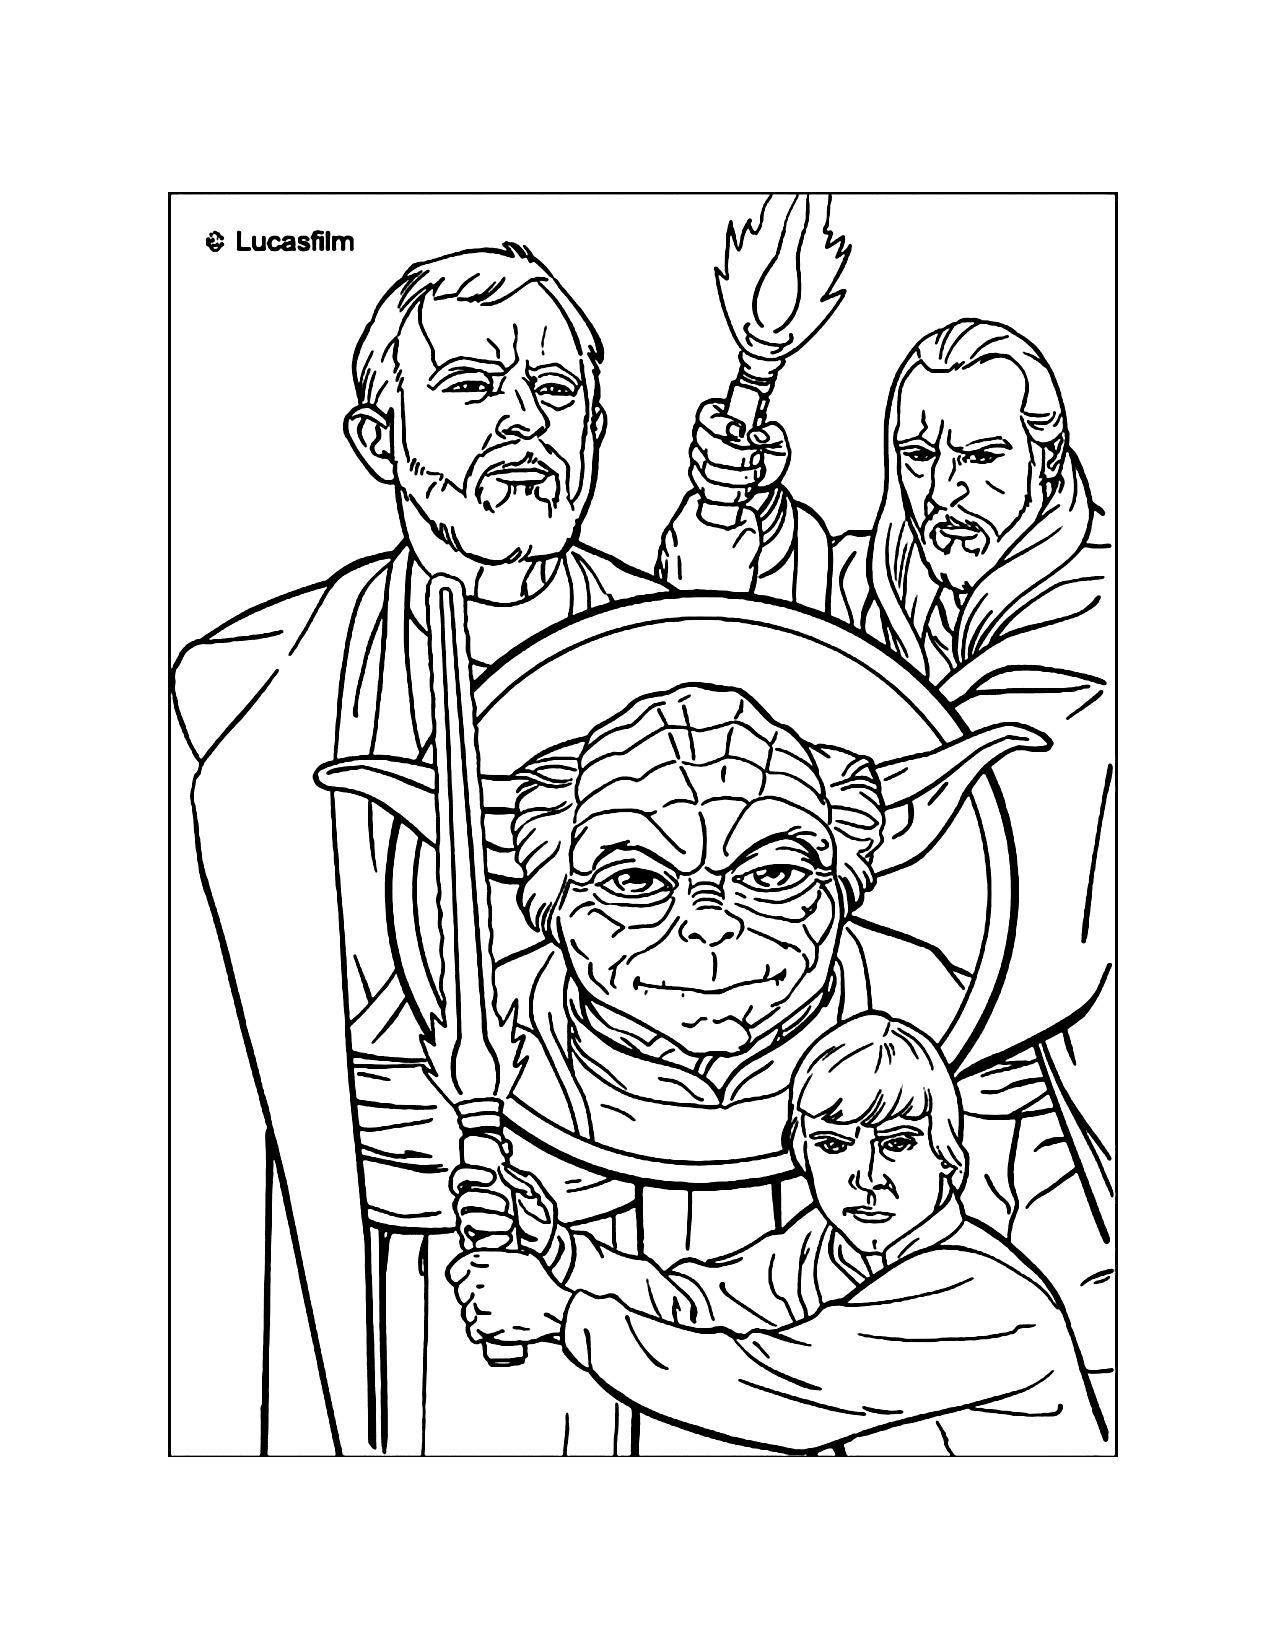 Star Wars Characters Coloring Page